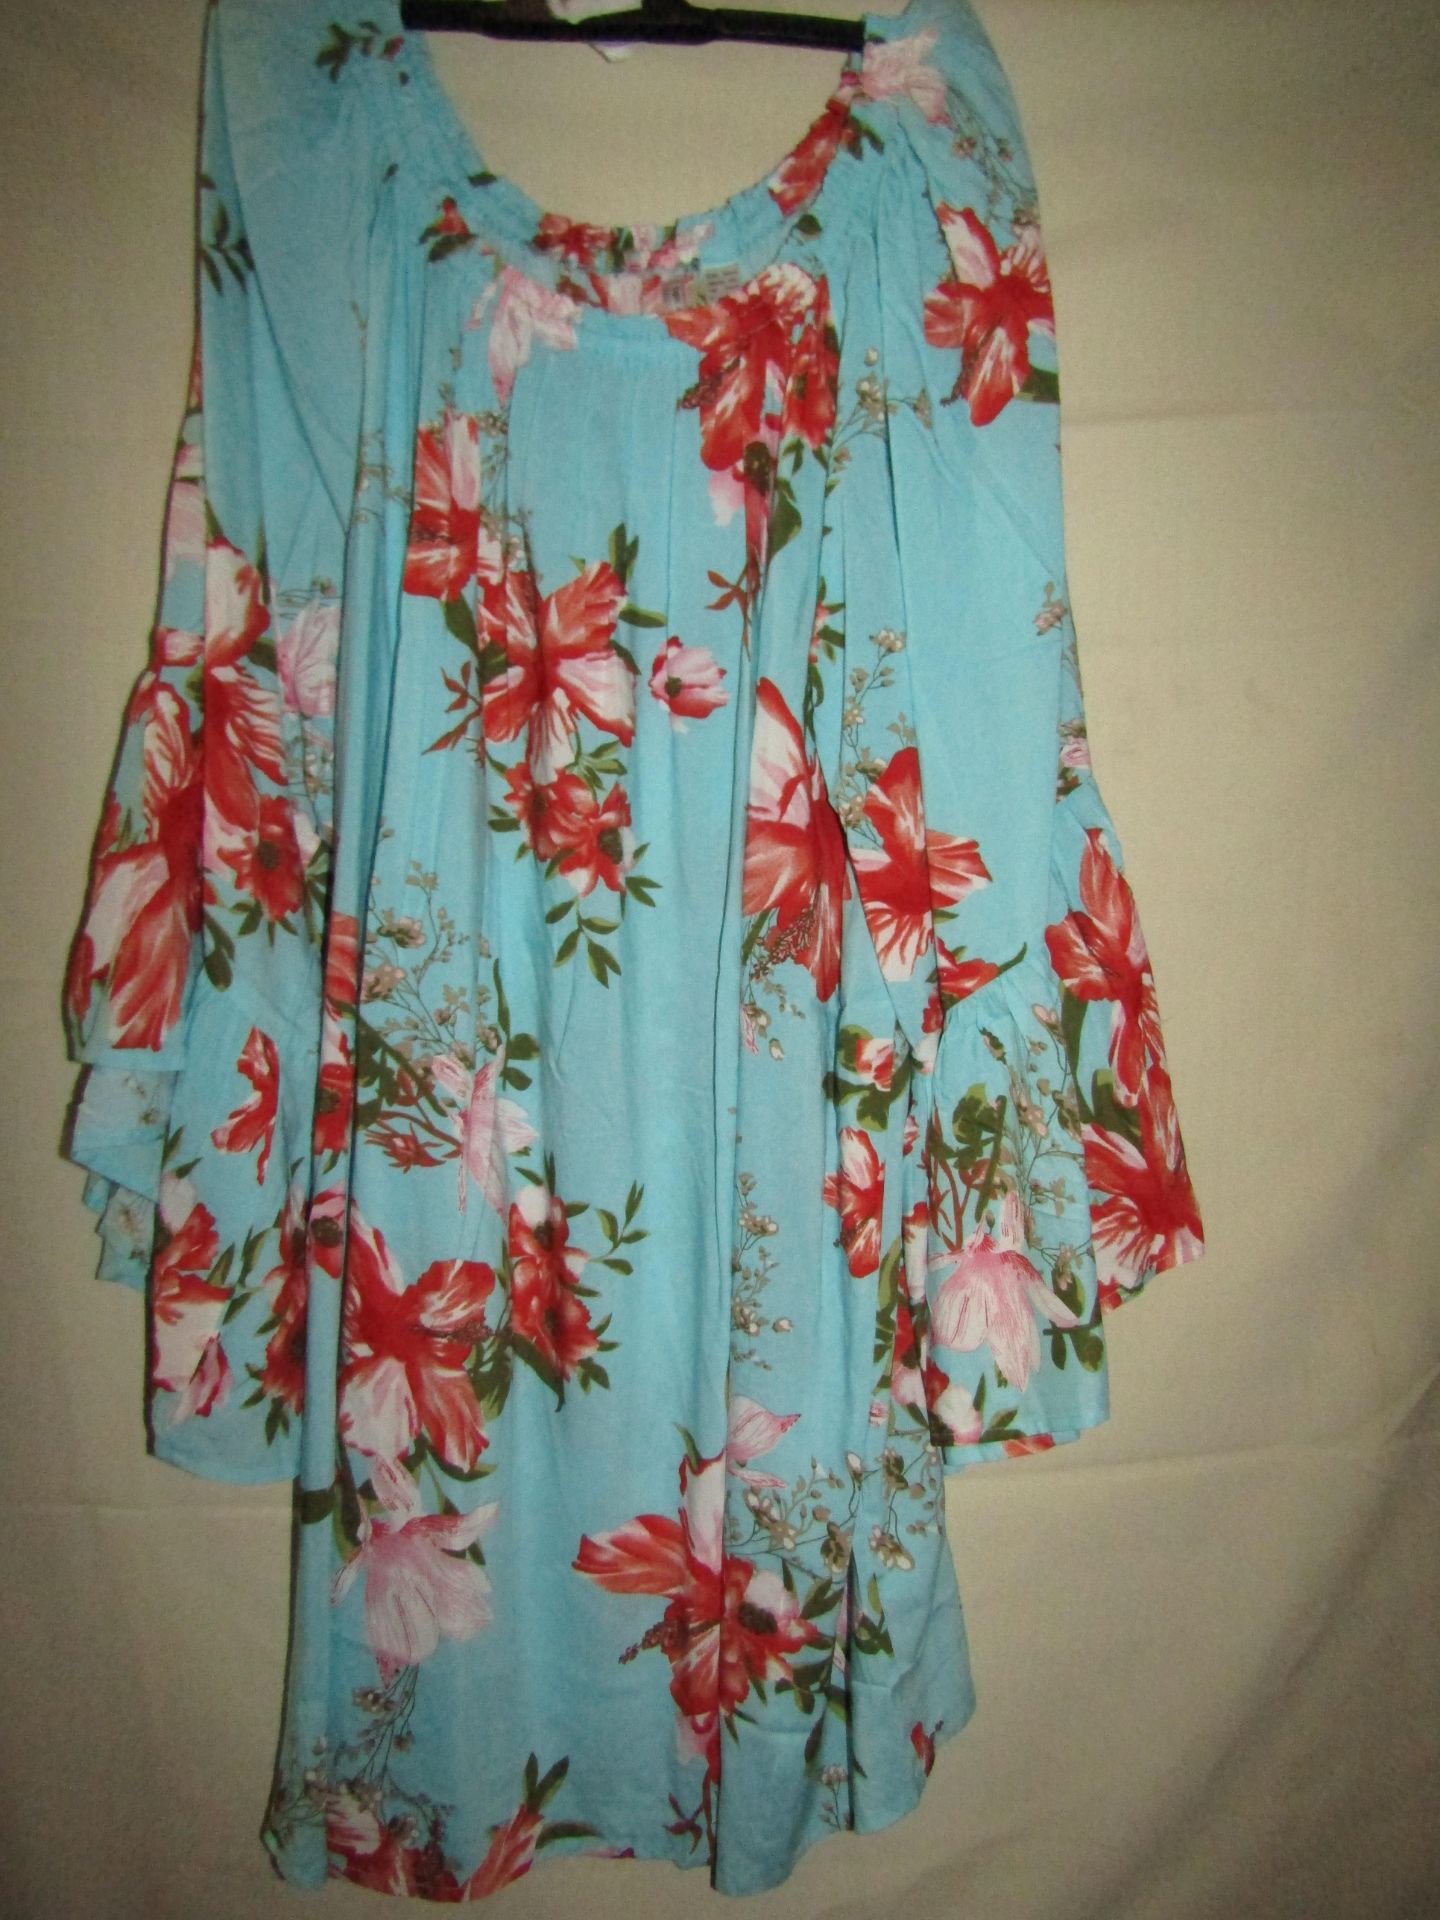 BPC Selection Top Size 2 X/L ( May Have Been Worn ) Good Condition